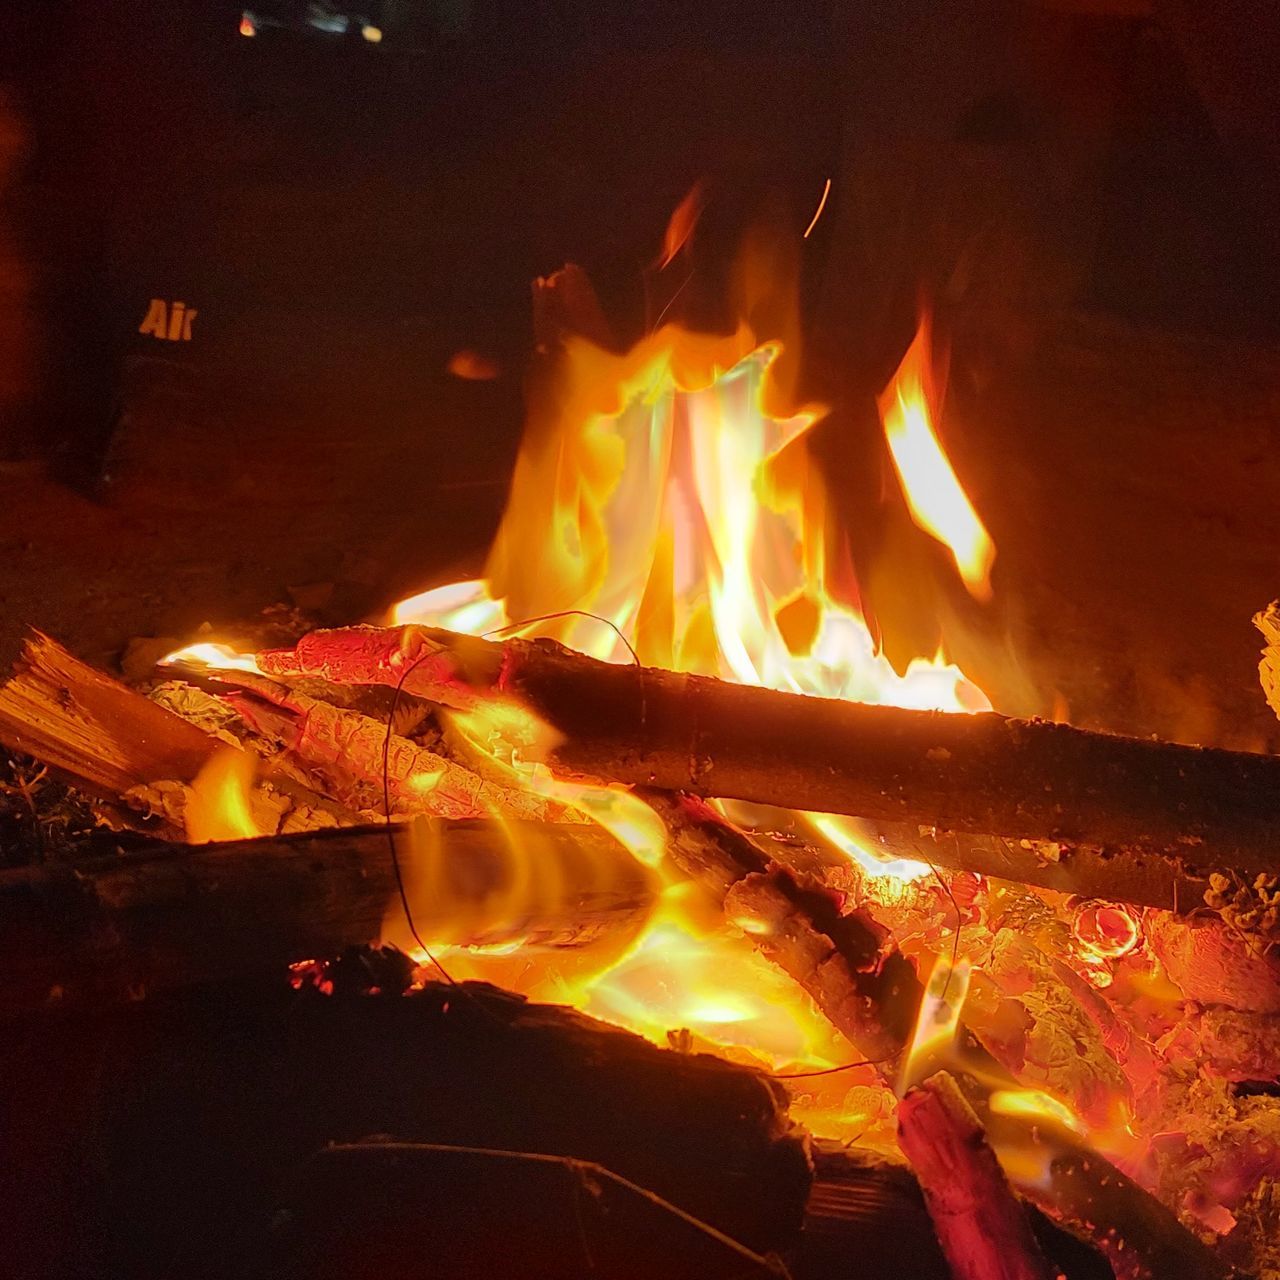 heat, fire, burning, flame, campfire, night, fireplace, bonfire, nature, no people, glowing, motion, orange color, wood, log